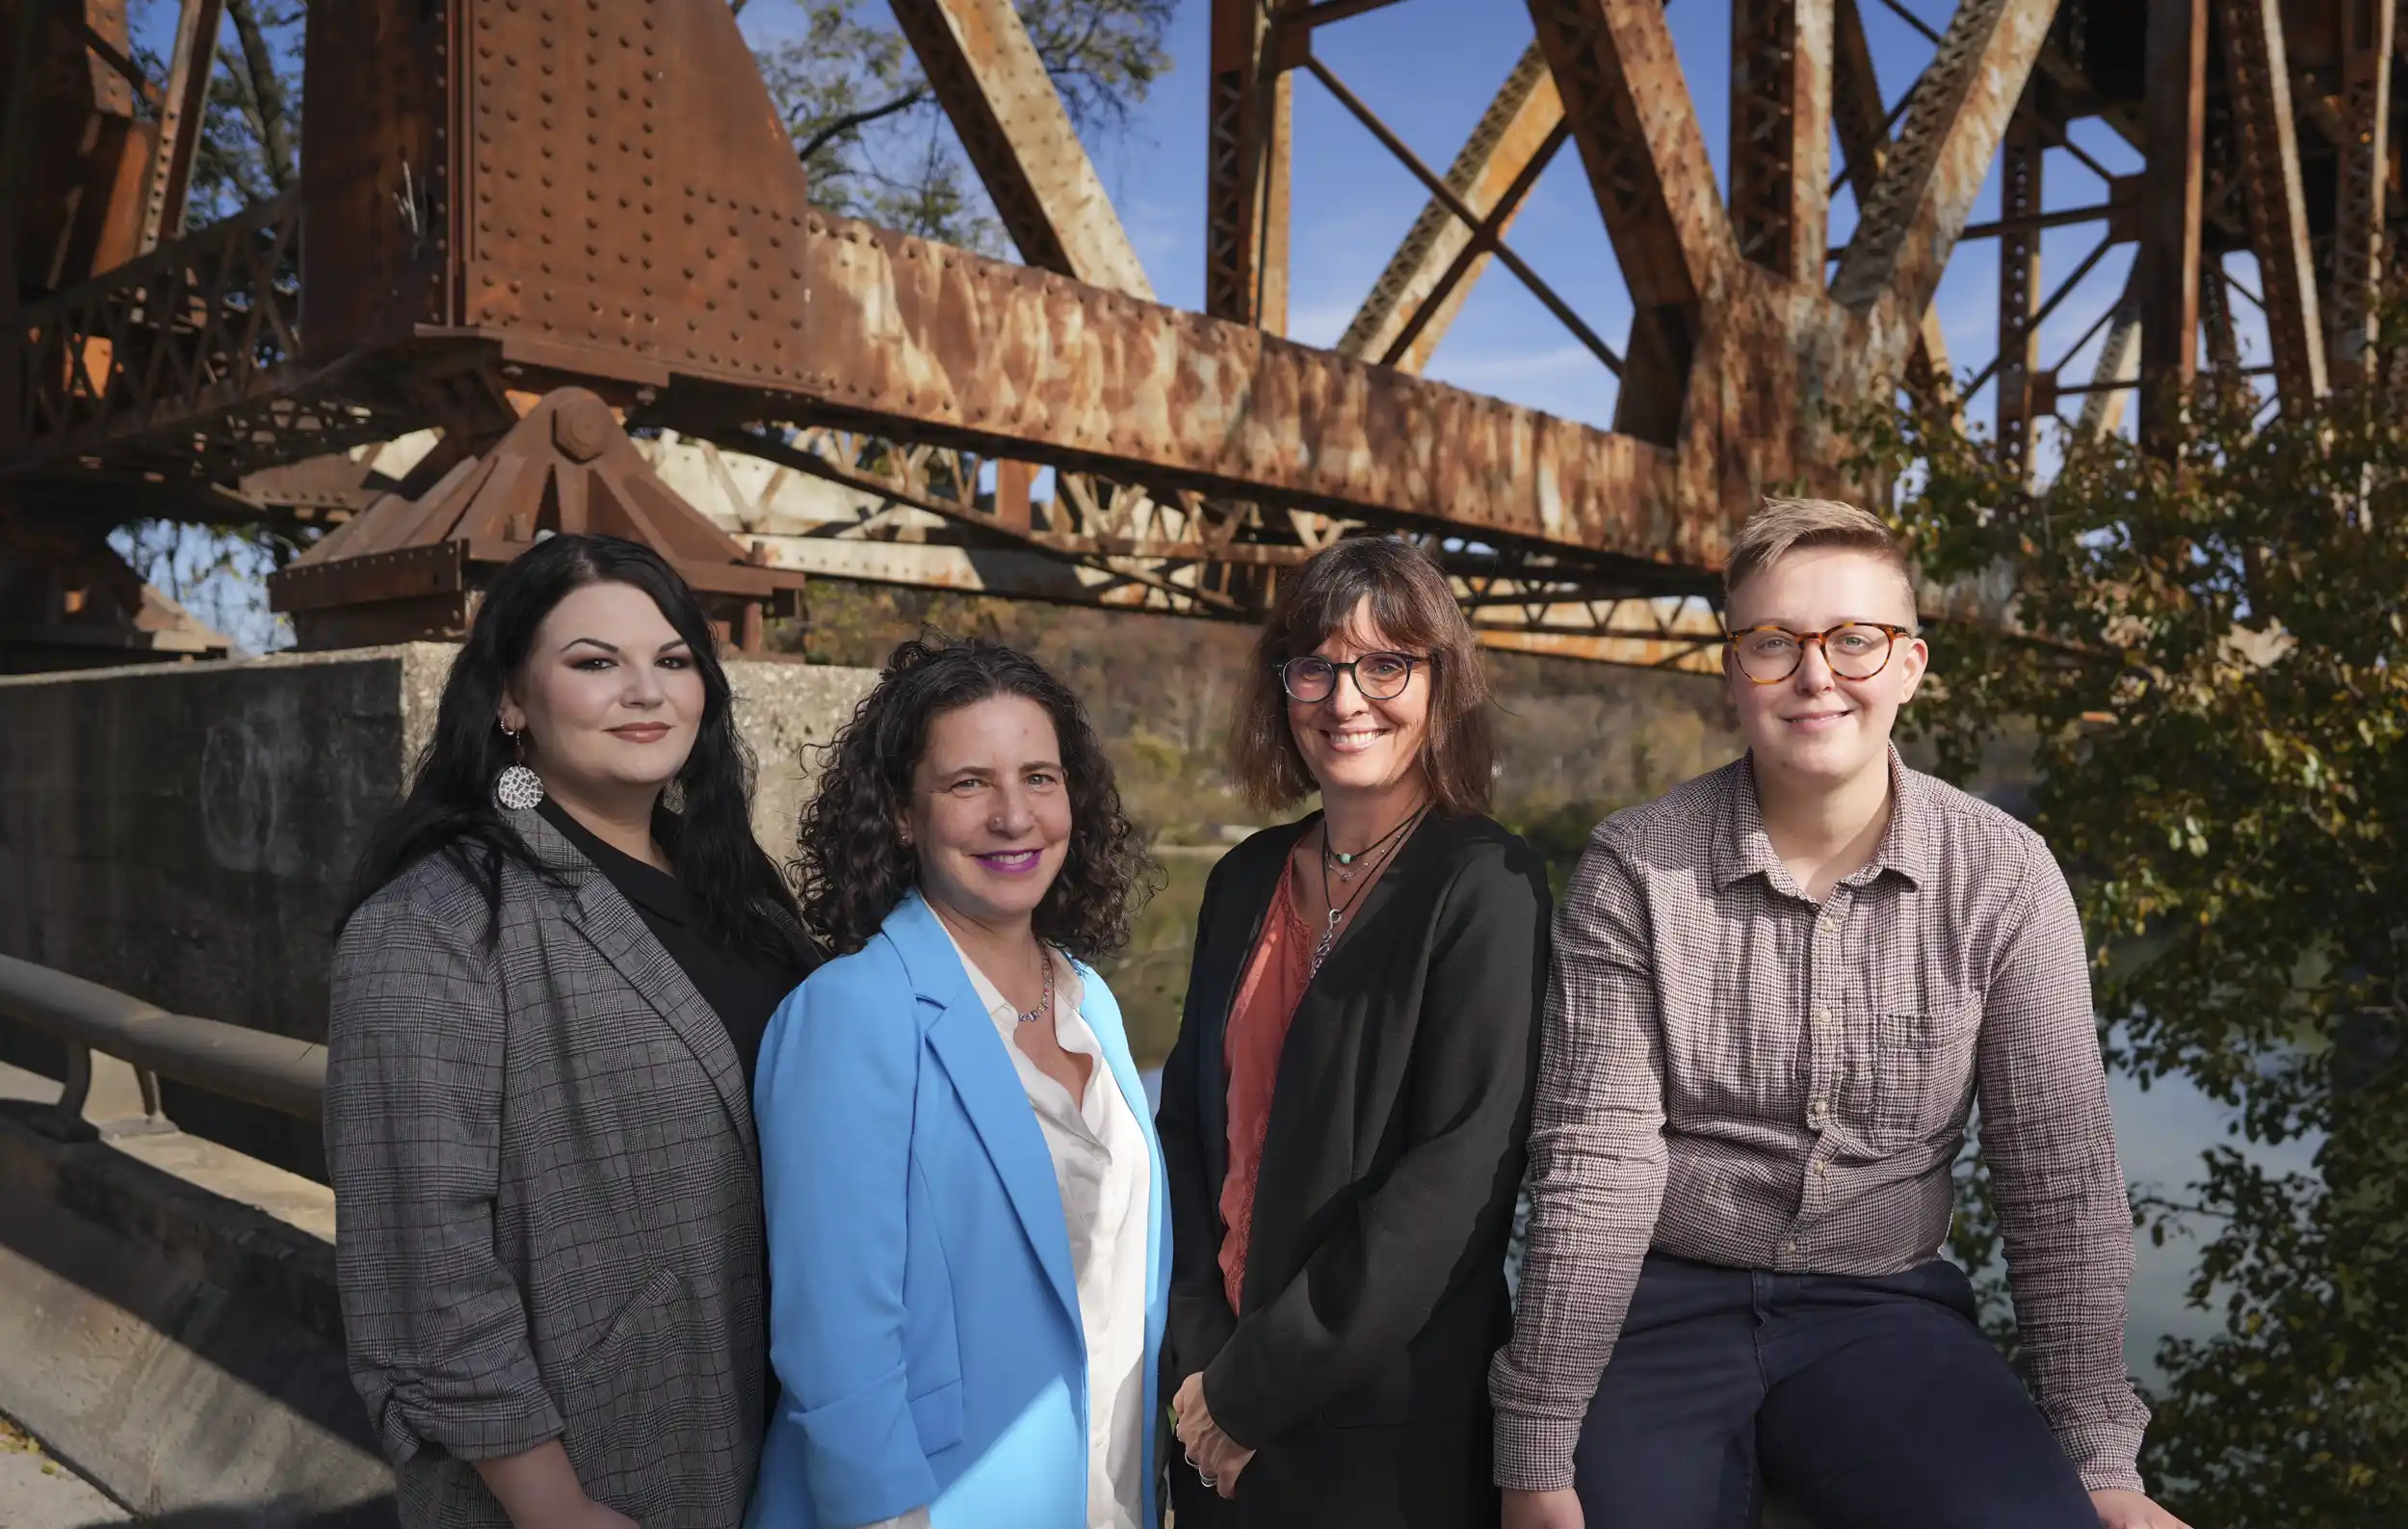 The Appalachian Justice Research Center's Staff, L-R, Sarah Cooper, Wendy Bach, Michelle Brown, and Han Lemberg